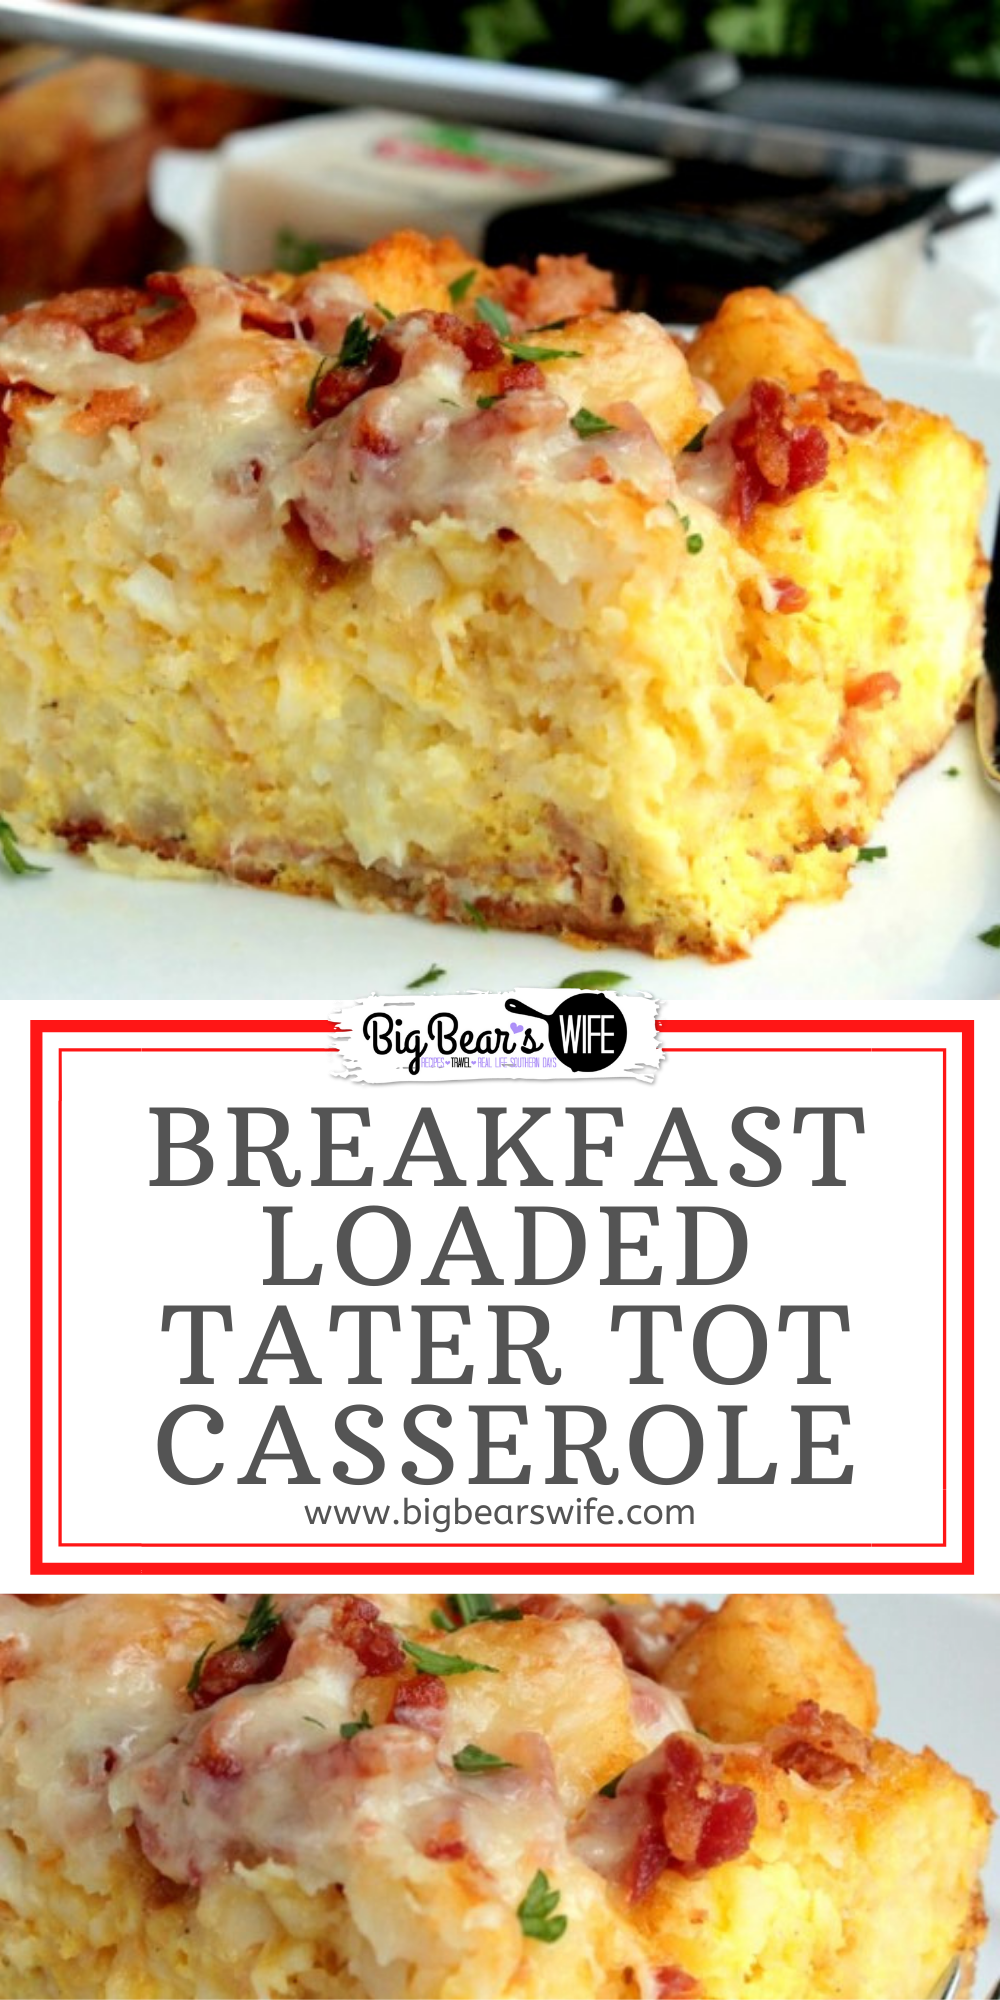 Make this Breakfast Tater Tot Casserole ahead of time and then reheat it for breakfast or brunch! This is great for breakfast, brunch or even dinner! via @bigbearswife